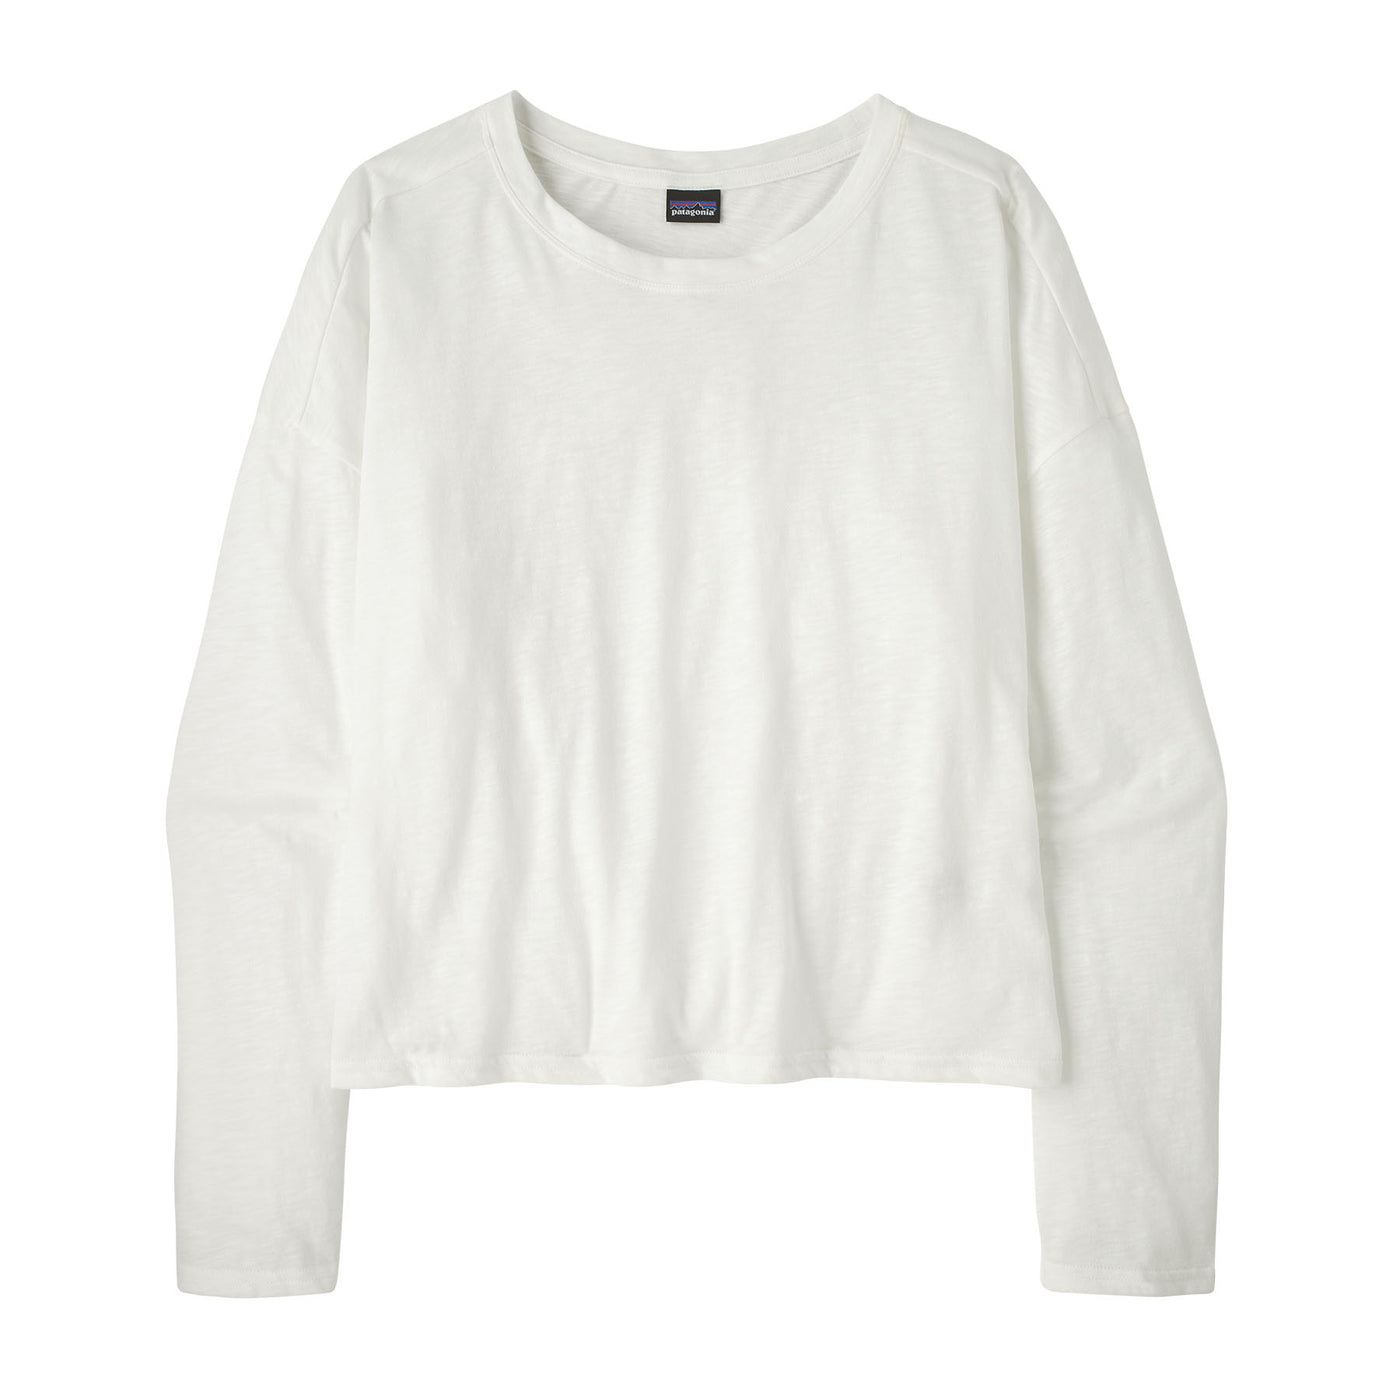 PATAGONIA Women's Long-Sleeved Mainstay Top White WHI